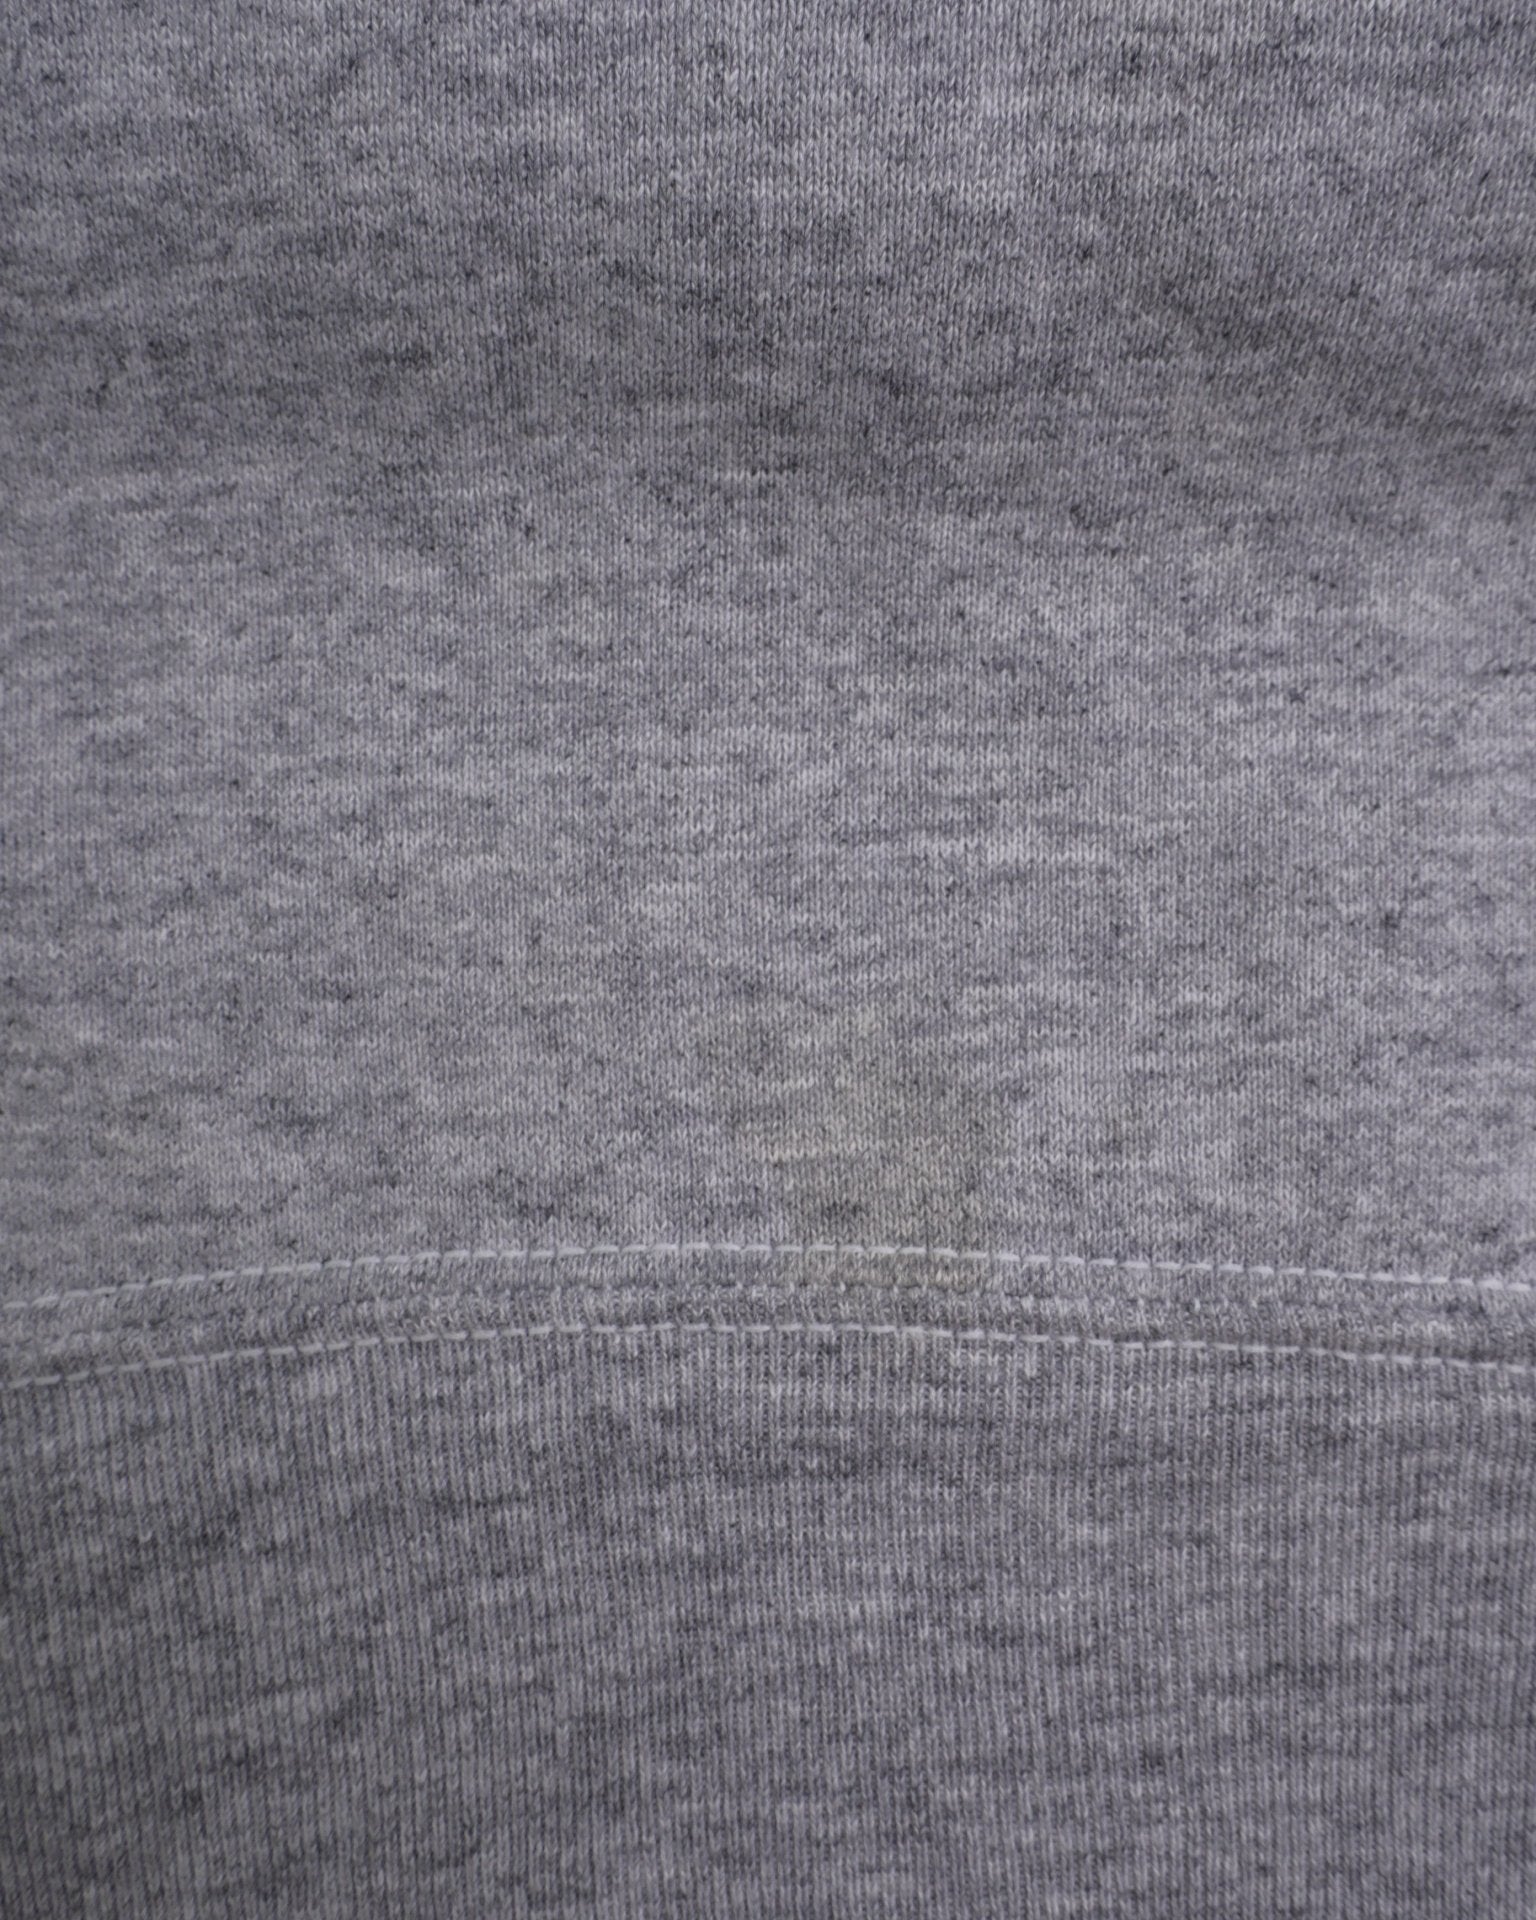 'Wilson' embroidered Spellout grey Sweater - Peeces